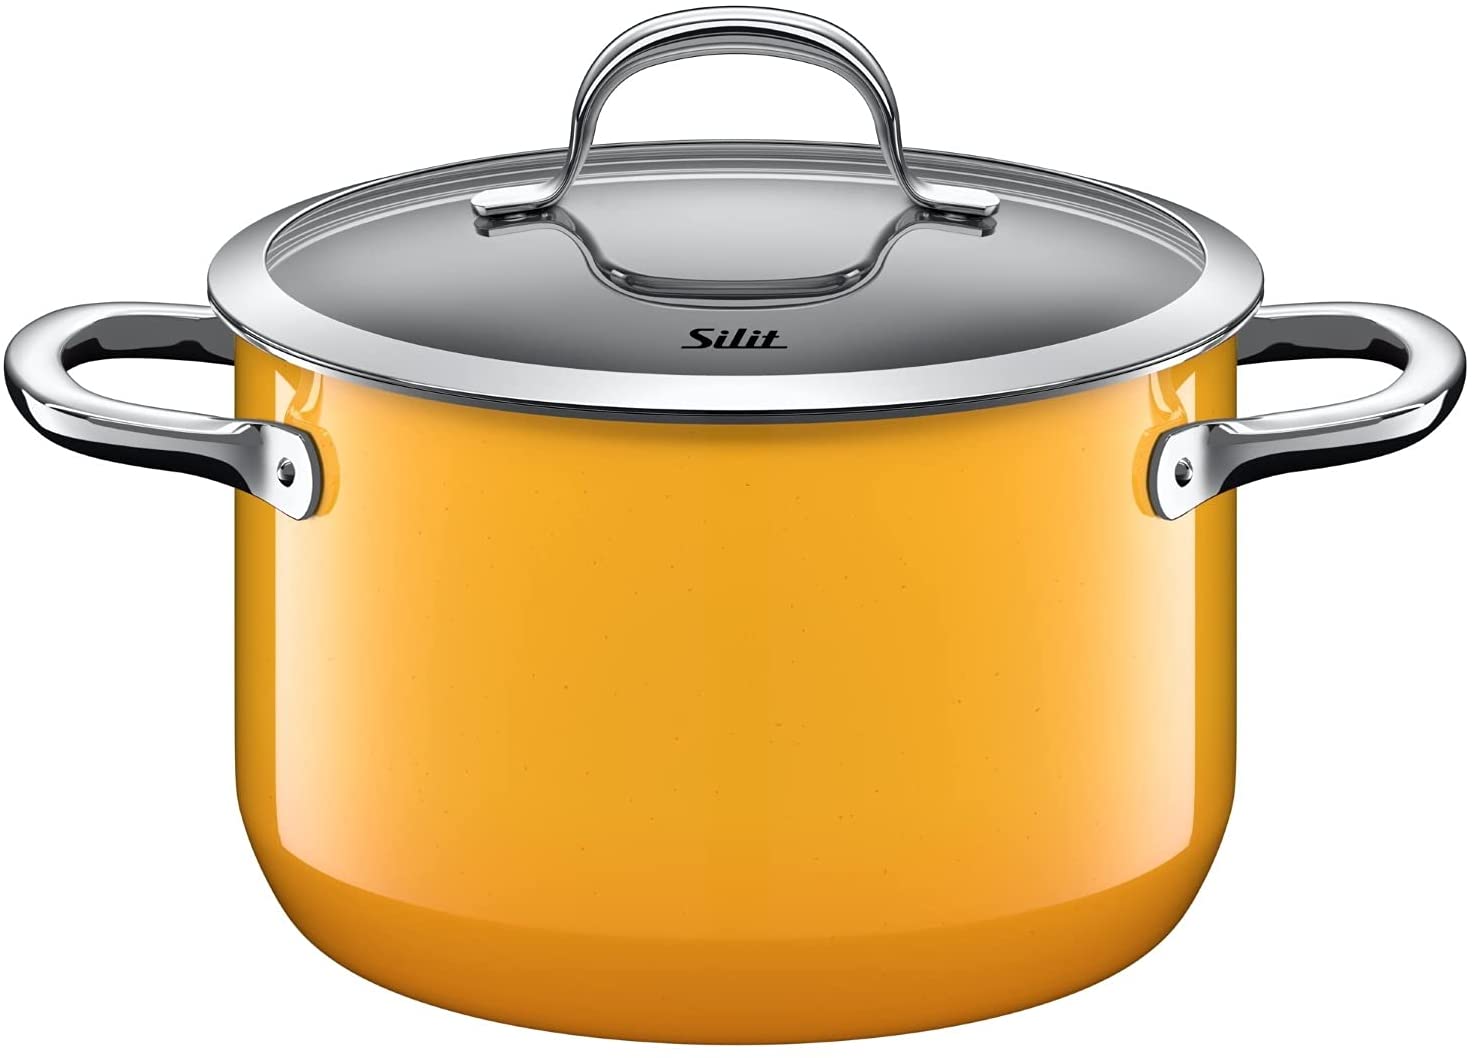 Silit Passion Yellow Saucepan with Glass Lid High Diameter 20 cm Silargan Functional Ceramic Pouring Rim Suitable for Induction Cookers 3.7 L